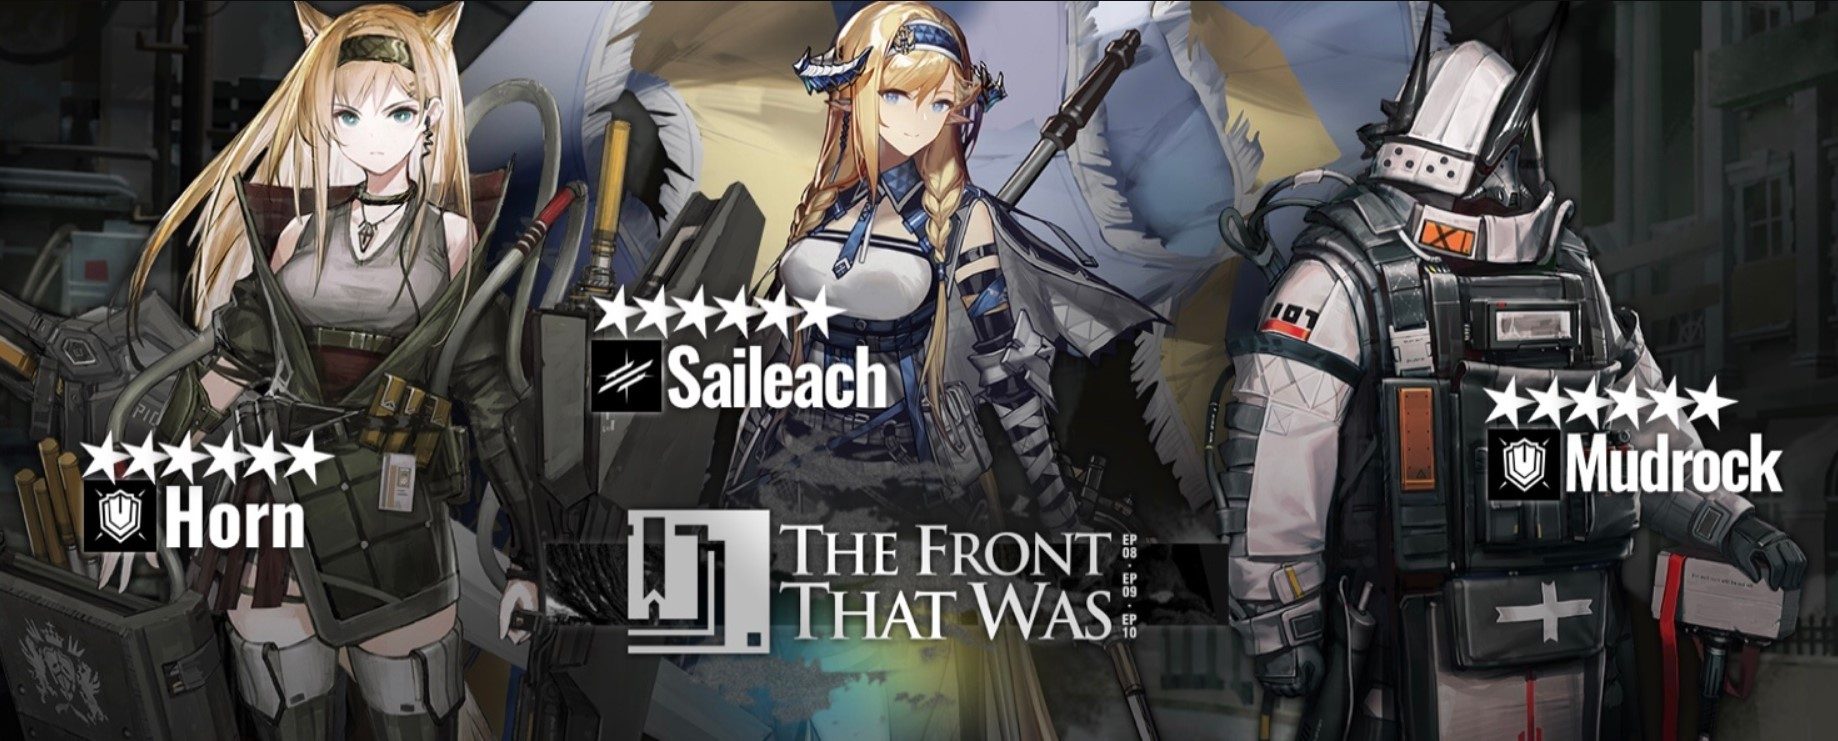 Arknights – Mudrock, Saileach, Horn, and Whisperain in Chapter 11 Limited-time Headhunting Banner